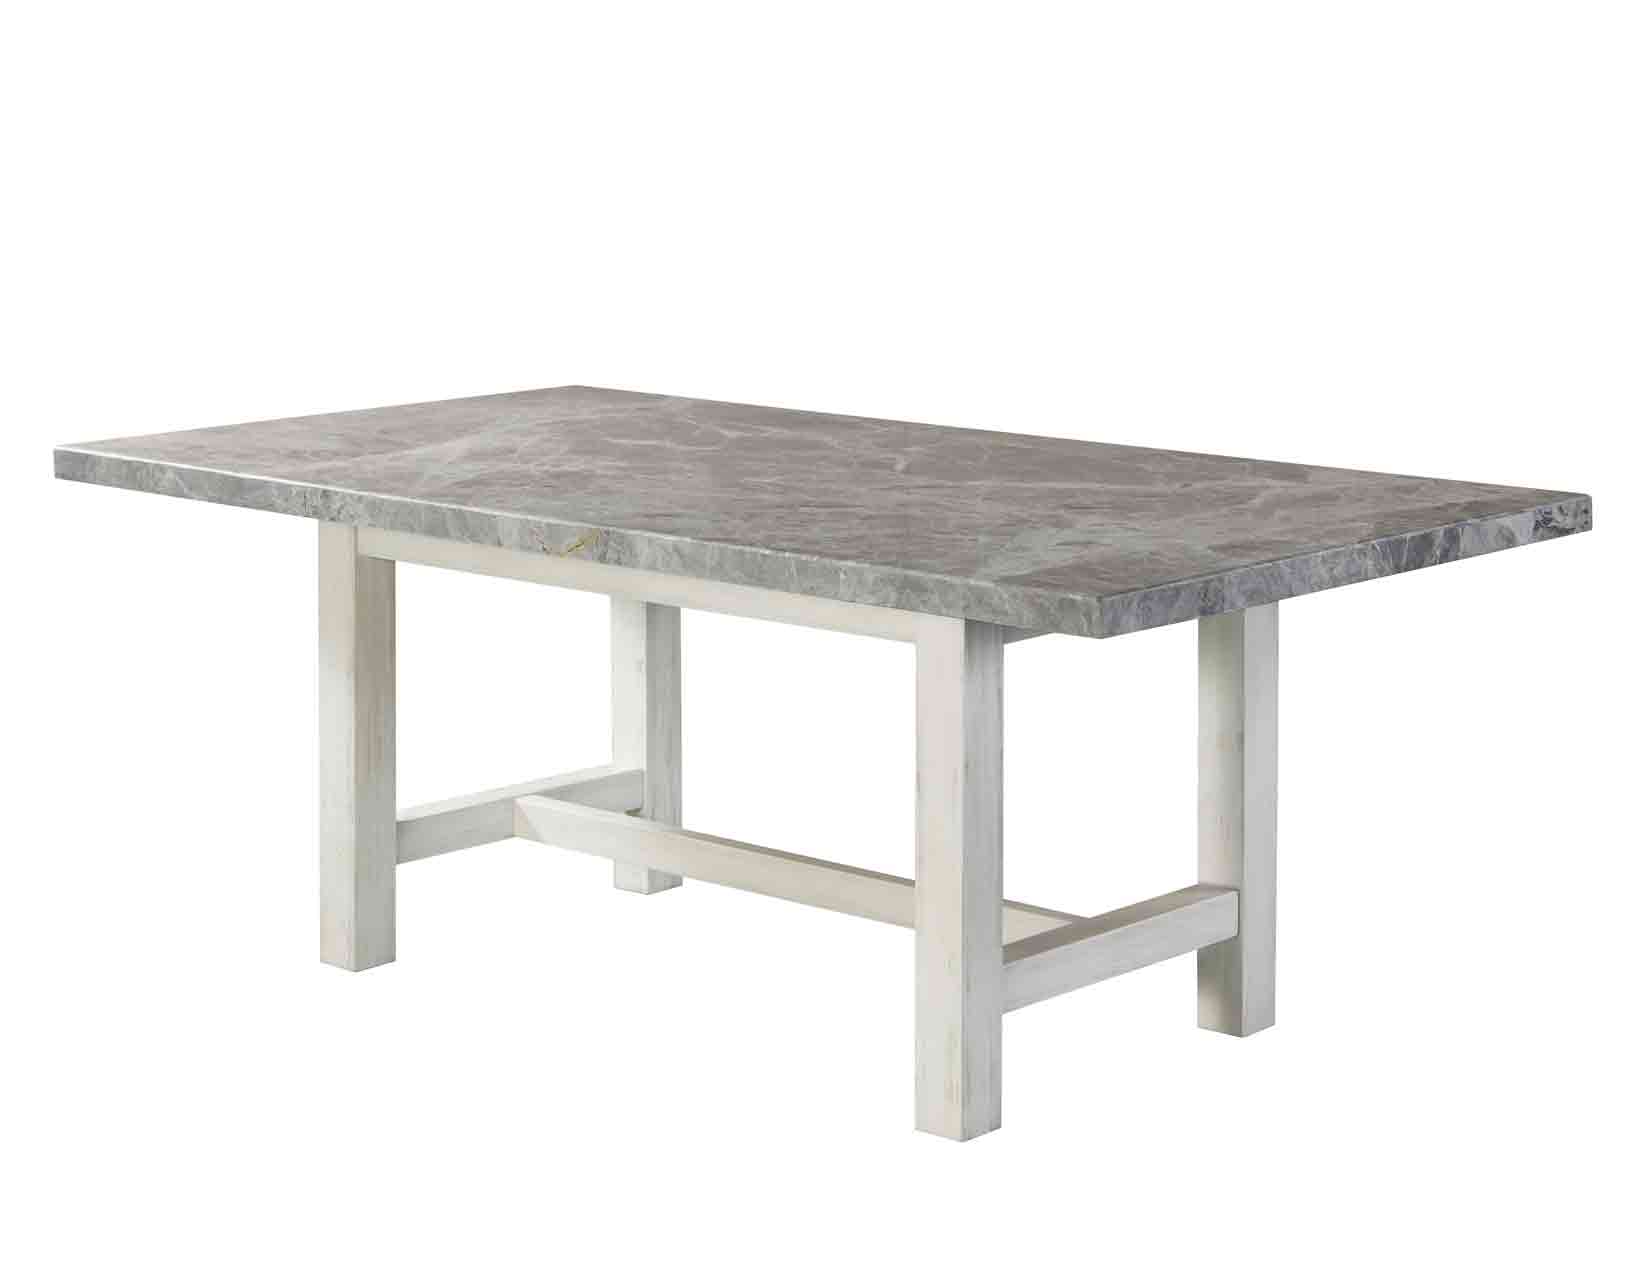 Canova 78-inch Gray Marble Top Dining Table - DFW